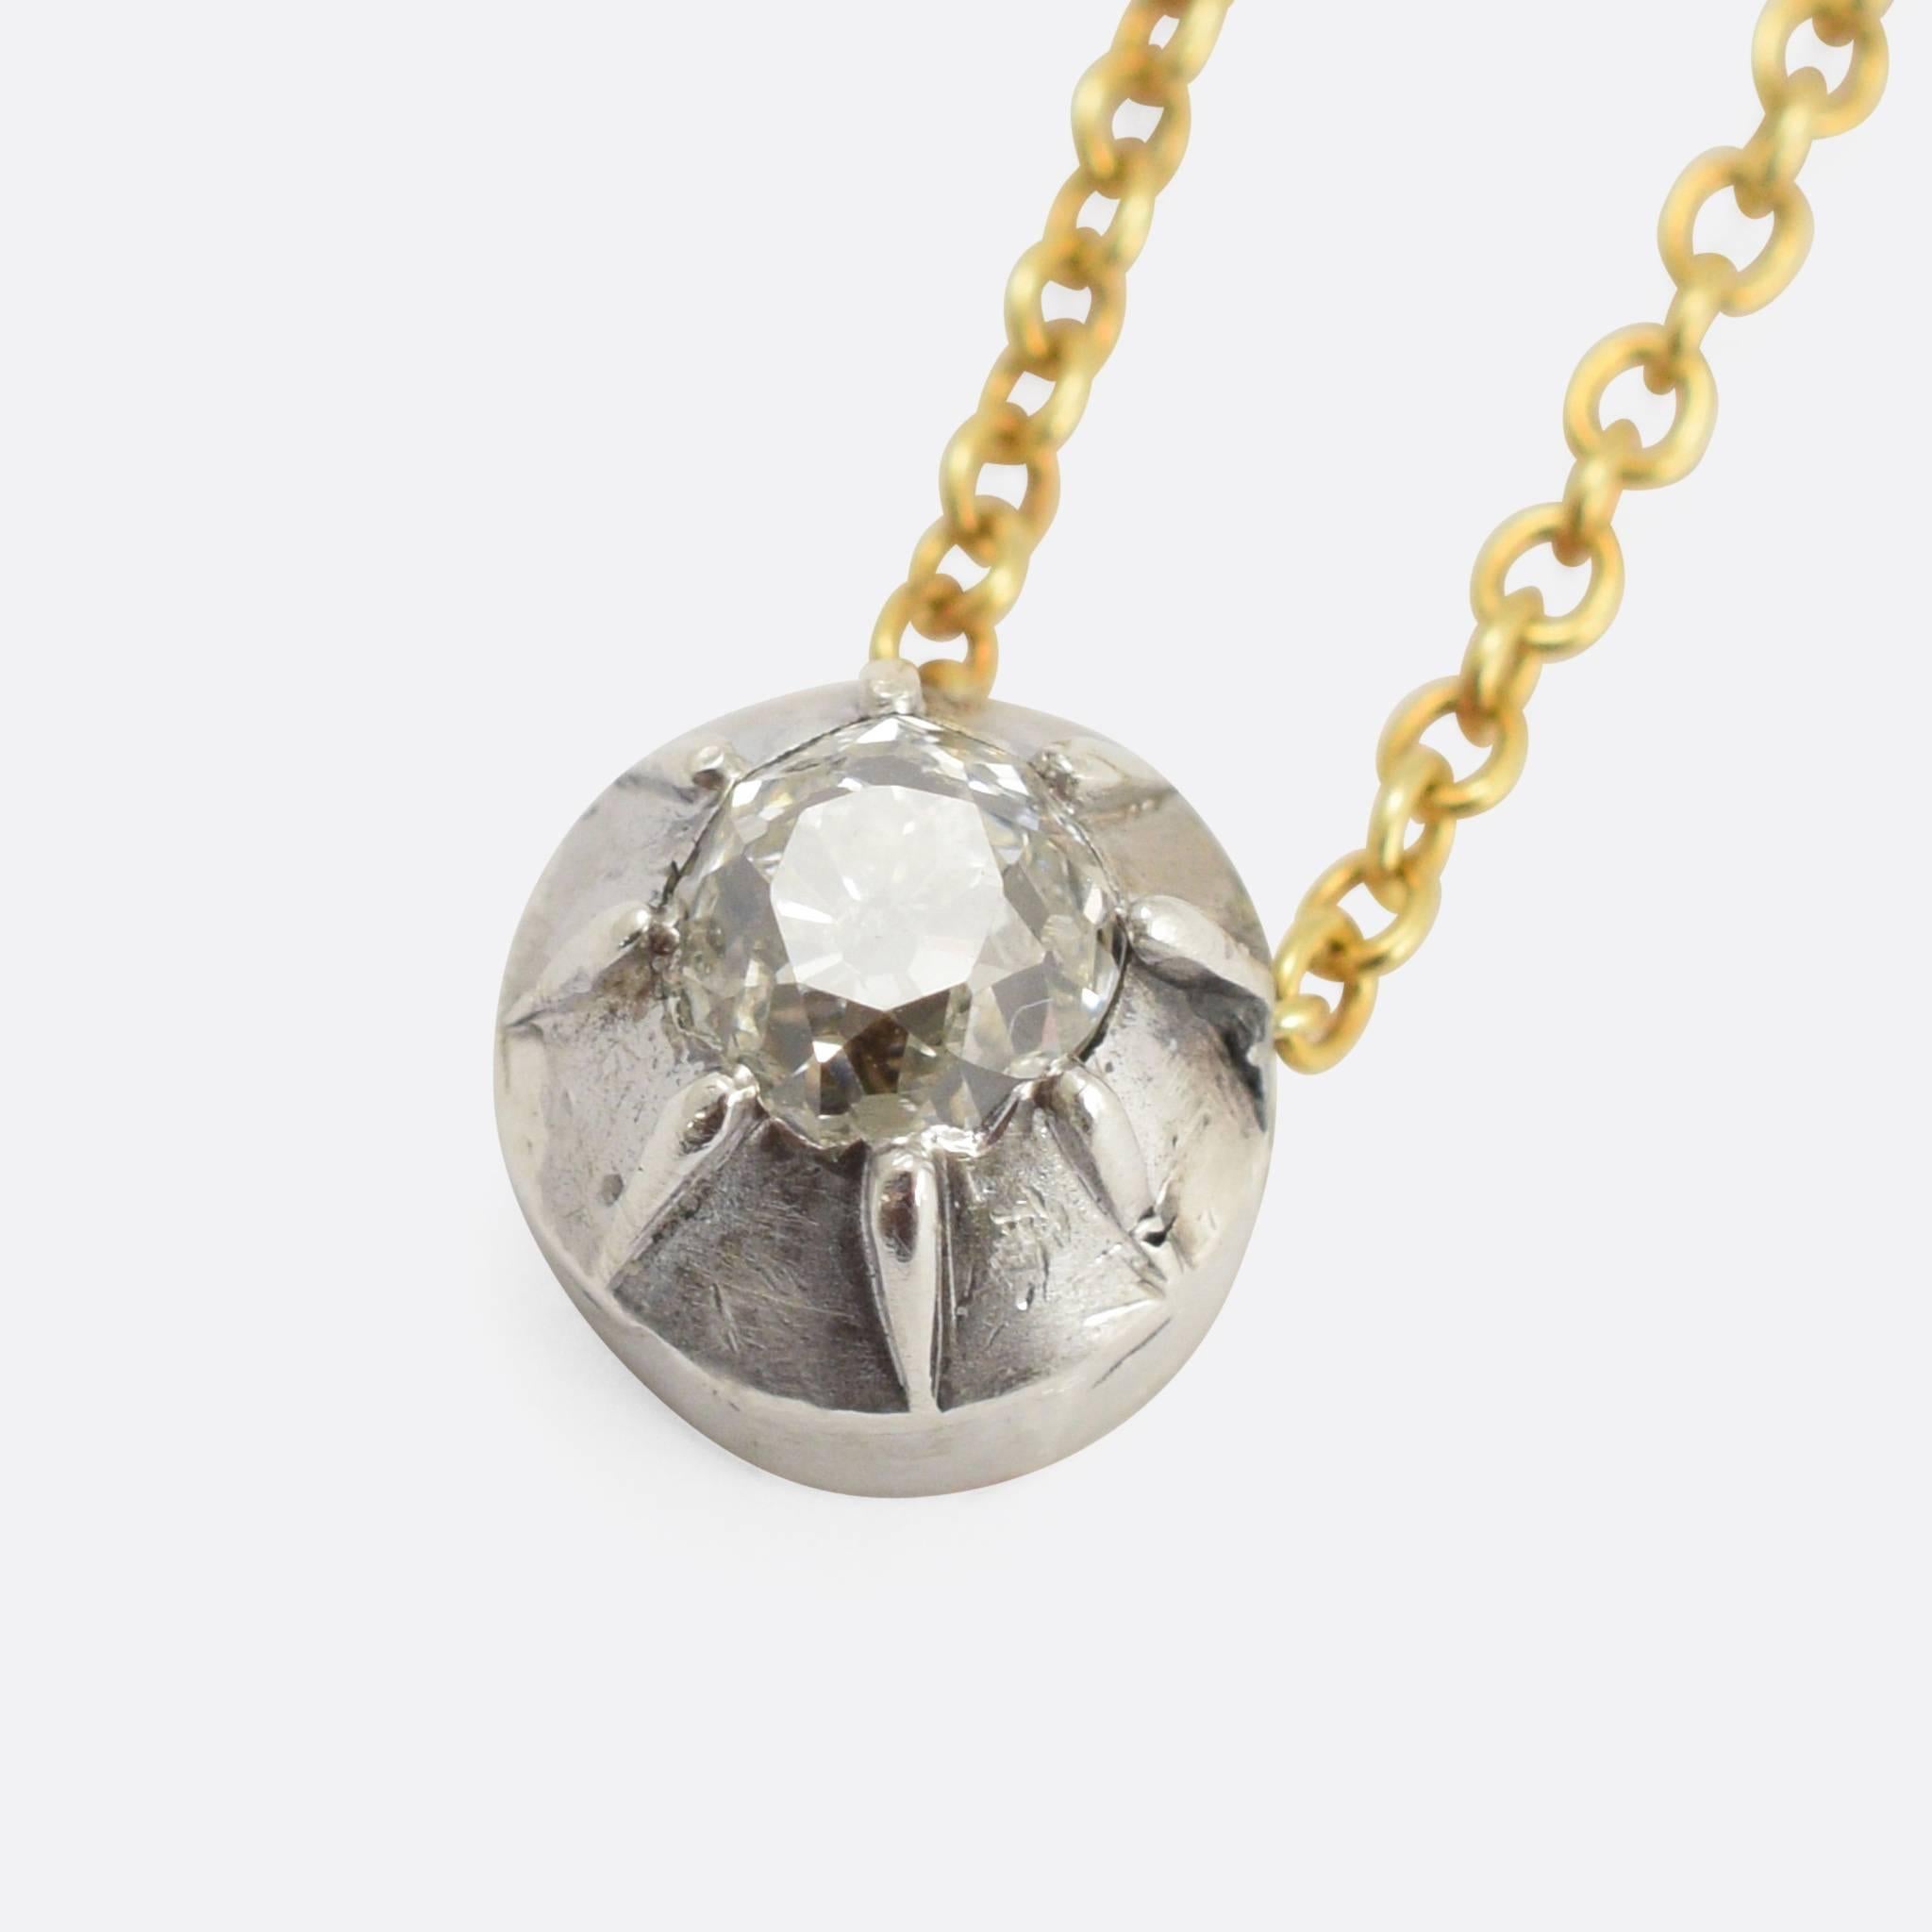 A stylish and understated diamond pendant, converted from a Georgian era brooch. The setting is modelled in sterling Silver, and features a typical early 19th Century claw mount - home to a beautiful old mine cut diamond. We have paired it with a